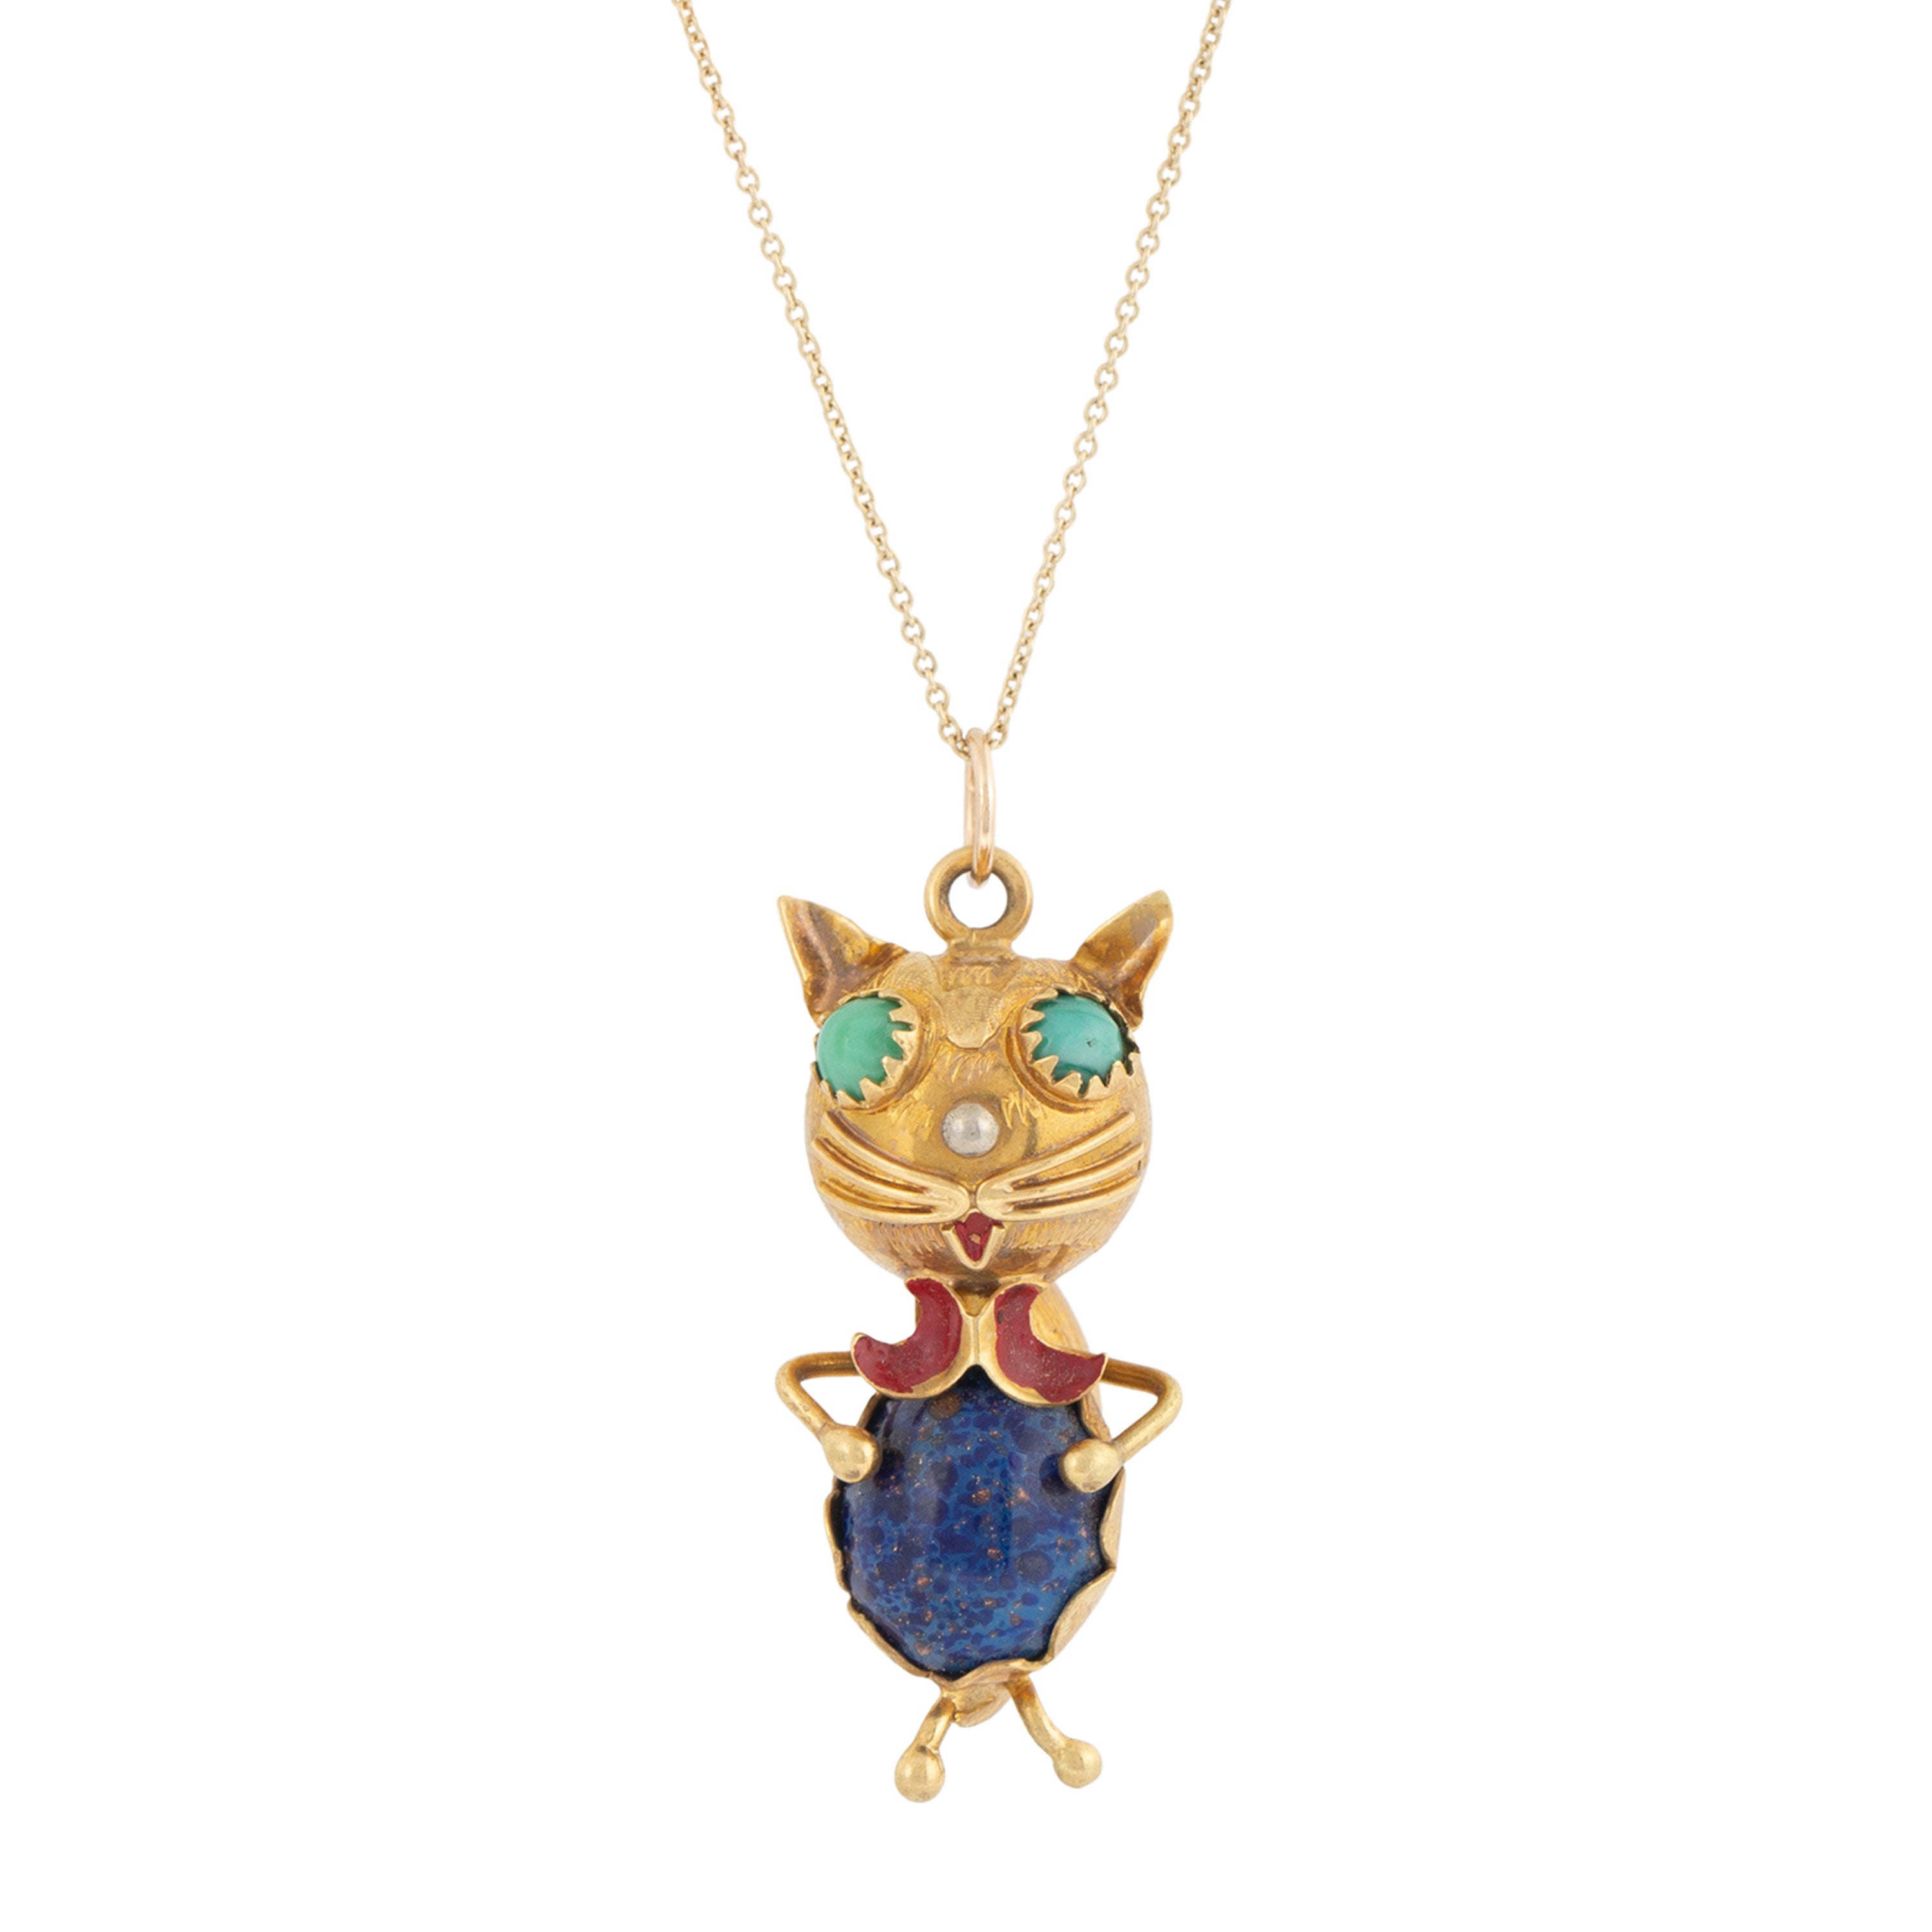 Vintage Italian Blue Glass And 18k Gold Cat Pendant Necklace